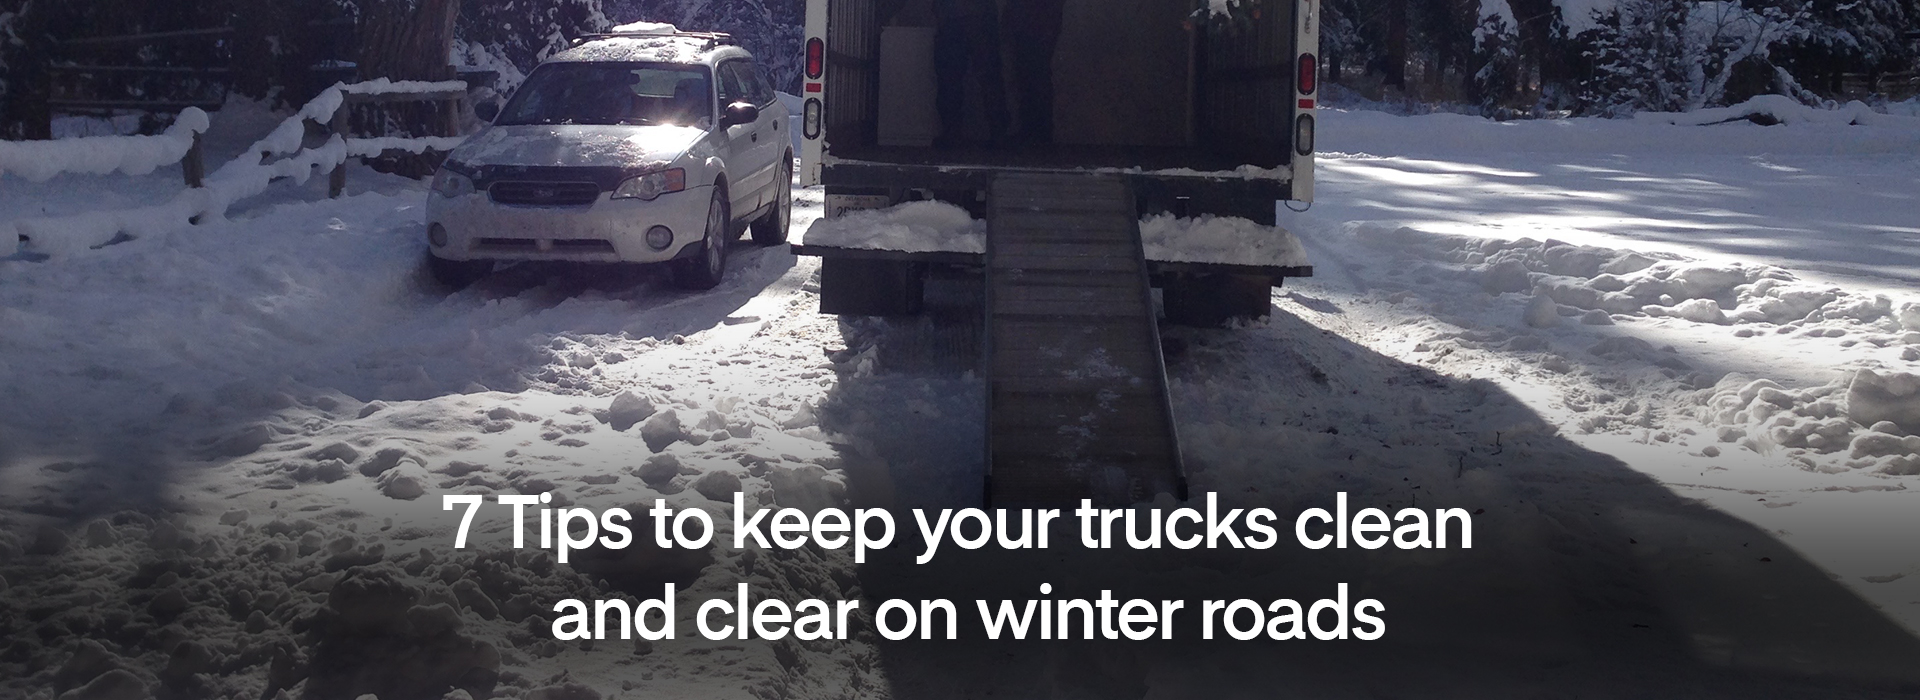 7 Tips To Keep Your Trucks Clean & Clear On Winter Roads